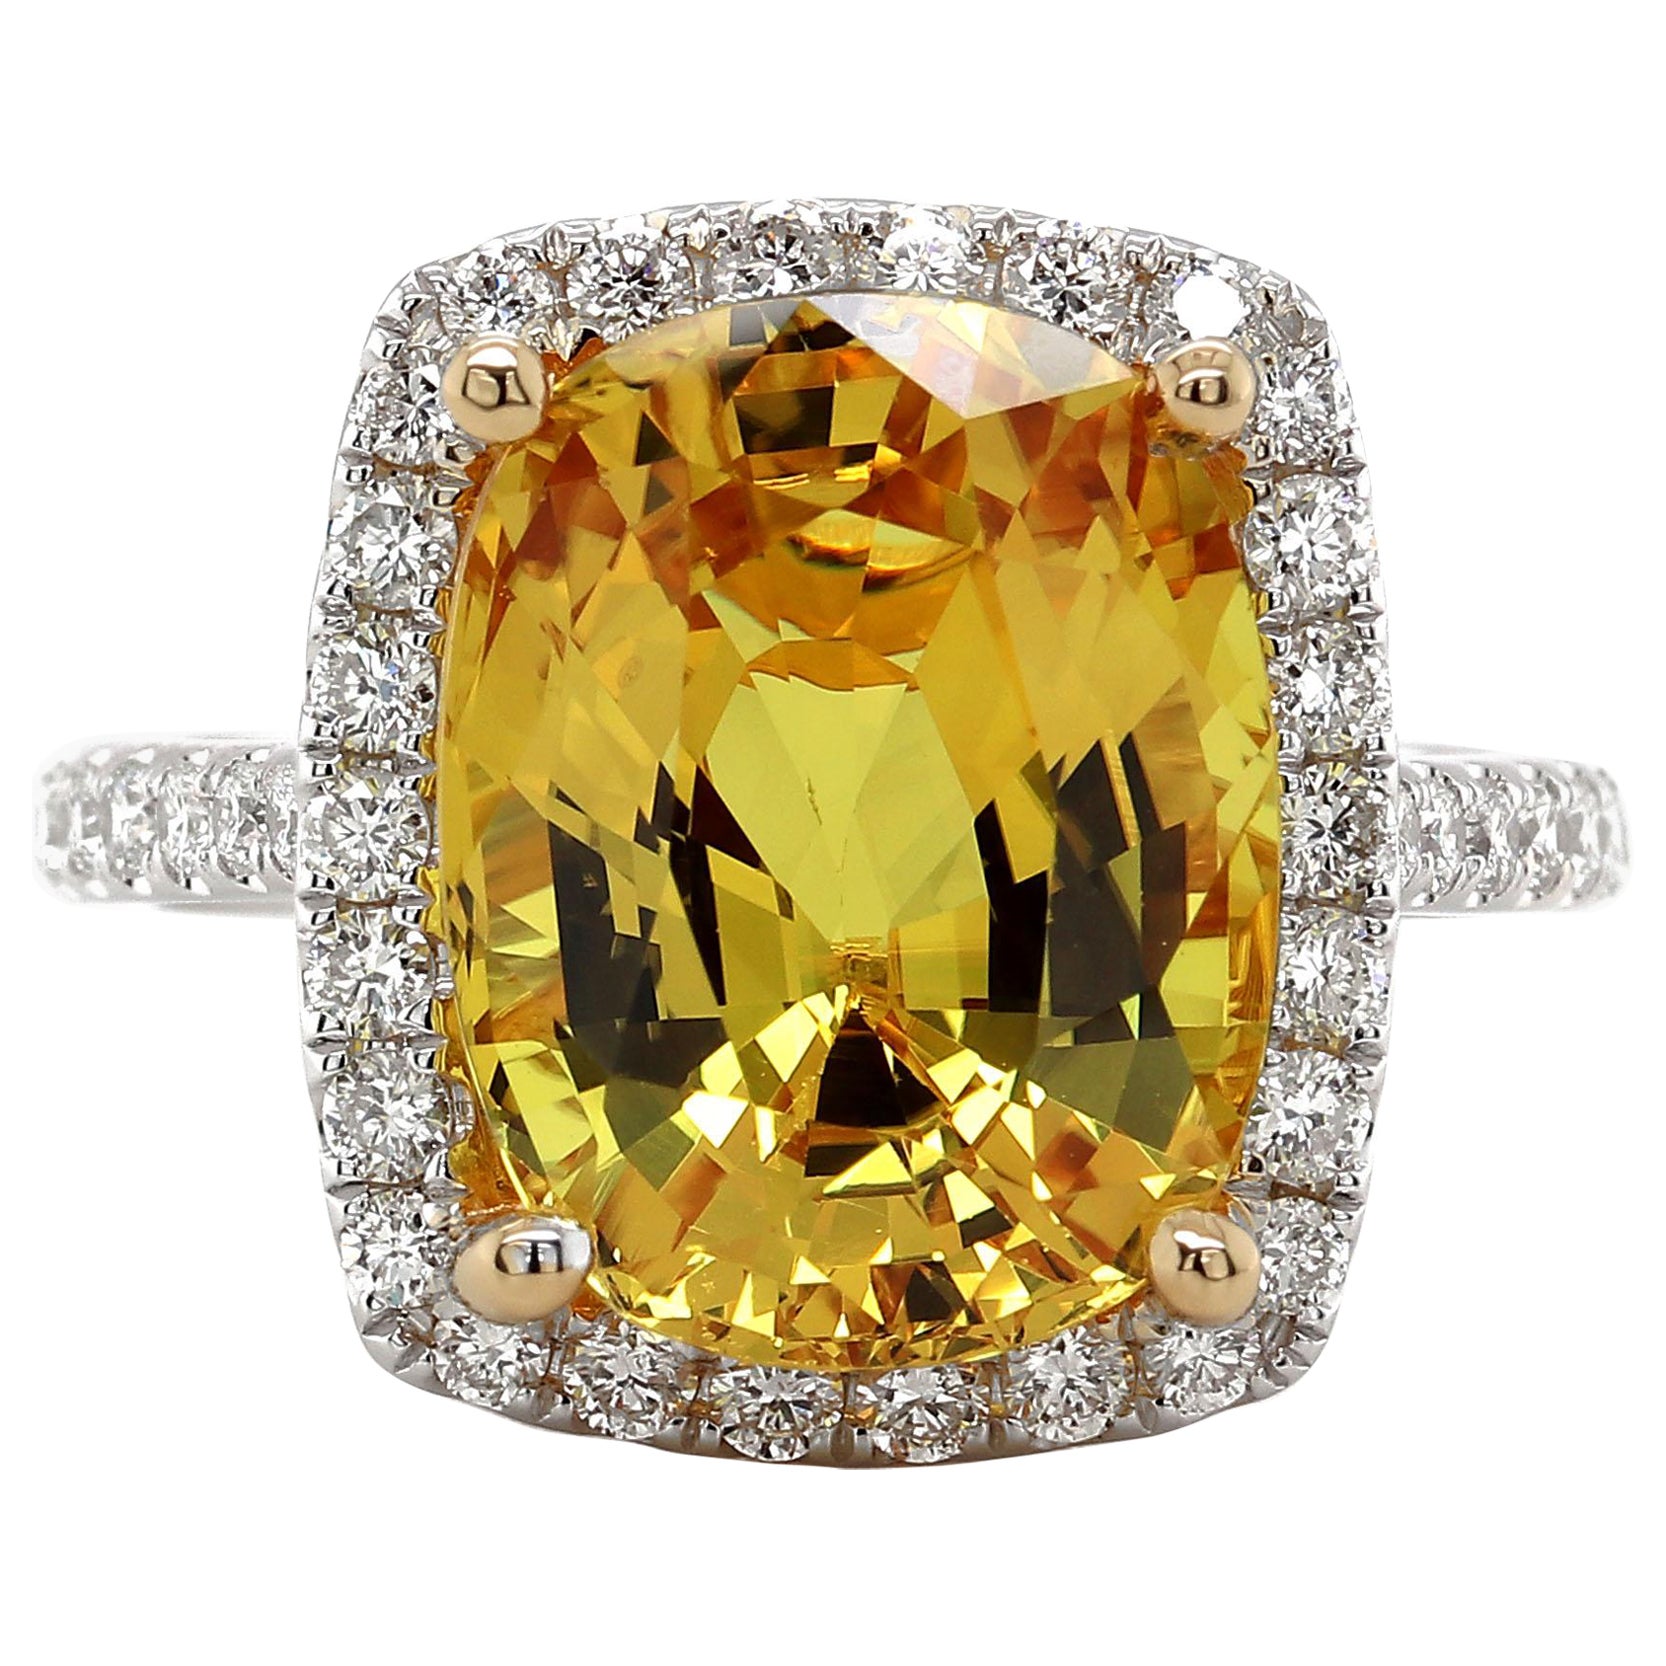 GIA 6.66 Carat Yellow Sapphire Ring in 18k White Gold For Sale